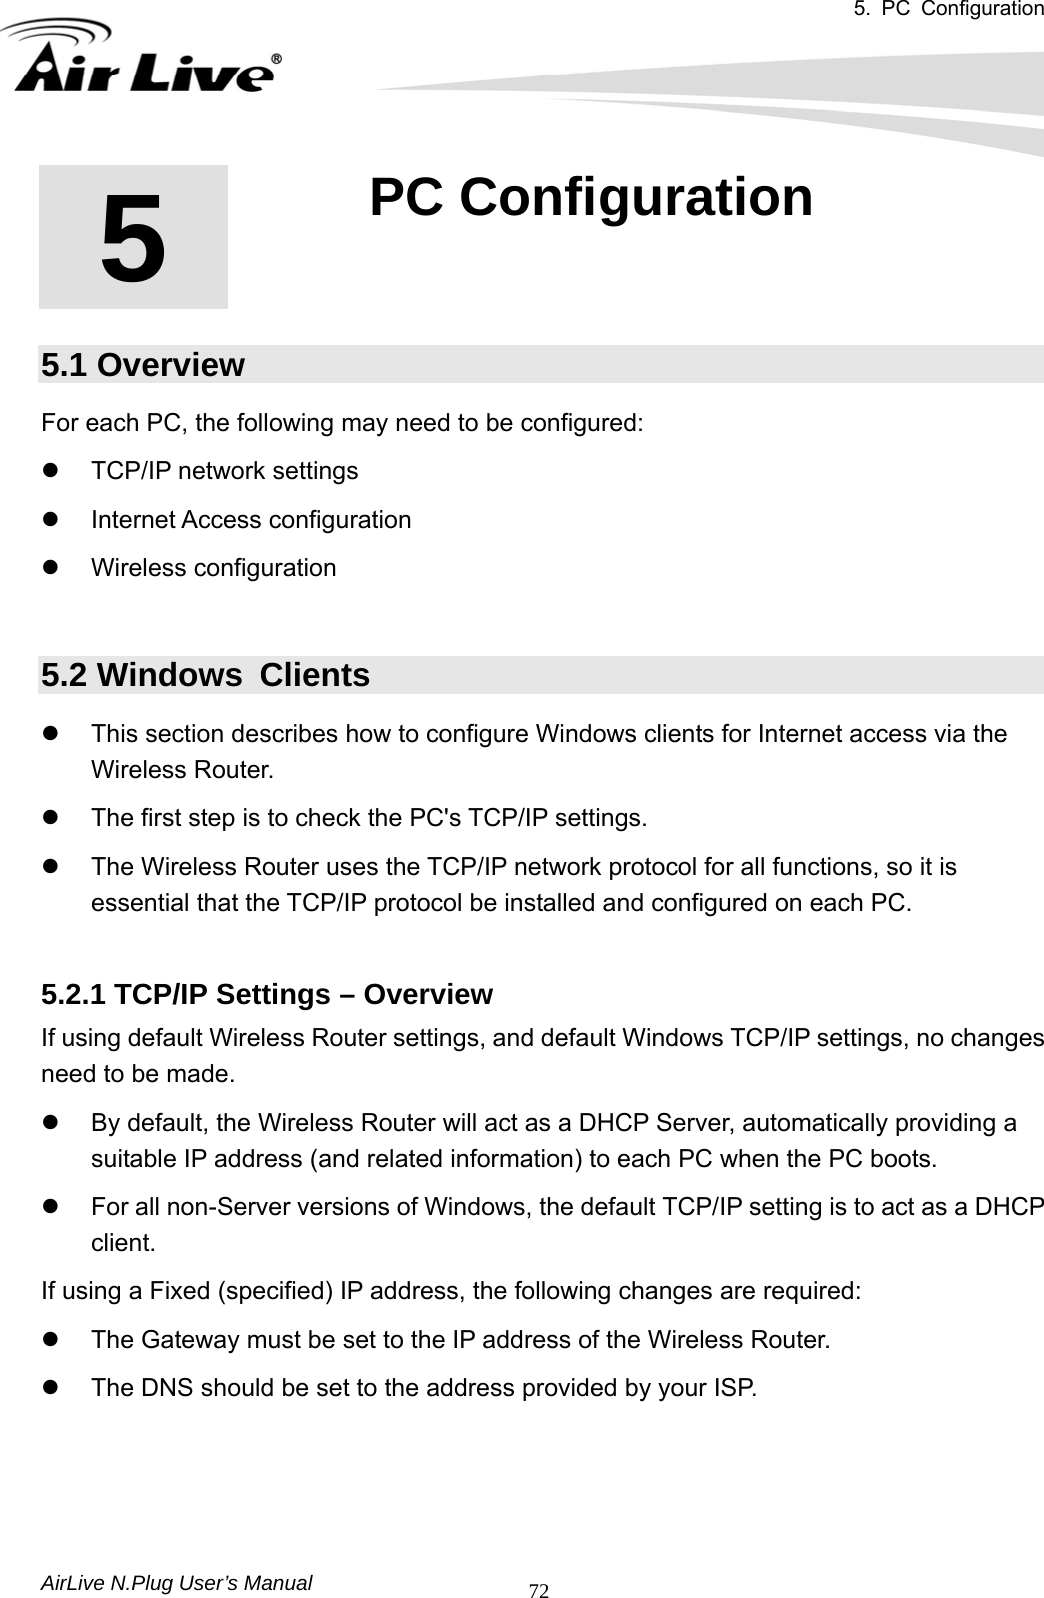 5. PC Configuration       AirLive N.Plug User’s Manual  72     5.1 Overview For each PC, the following may need to be configured: z  TCP/IP network settings   z Internet Access configuration  z Wireless configuration  5.2 Windows  Clients z  This section describes how to configure Windows clients for Internet access via the Wireless Router.   z  The first step is to check the PC&apos;s TCP/IP settings.     z  The Wireless Router uses the TCP/IP network protocol for all functions, so it is essential that the TCP/IP protocol be installed and configured on each PC.  5.2.1 TCP/IP Settings – Overview If using default Wireless Router settings, and default Windows TCP/IP settings, no changes need to be made.   z  By default, the Wireless Router will act as a DHCP Server, automatically providing a suitable IP address (and related information) to each PC when the PC boots.   z  For all non-Server versions of Windows, the default TCP/IP setting is to act as a DHCP client.  If using a Fixed (specified) IP address, the following changes are required:   z  The Gateway must be set to the IP address of the Wireless Router.   z  The DNS should be set to the address provided by your ISP.    5  5. PC Configuration  